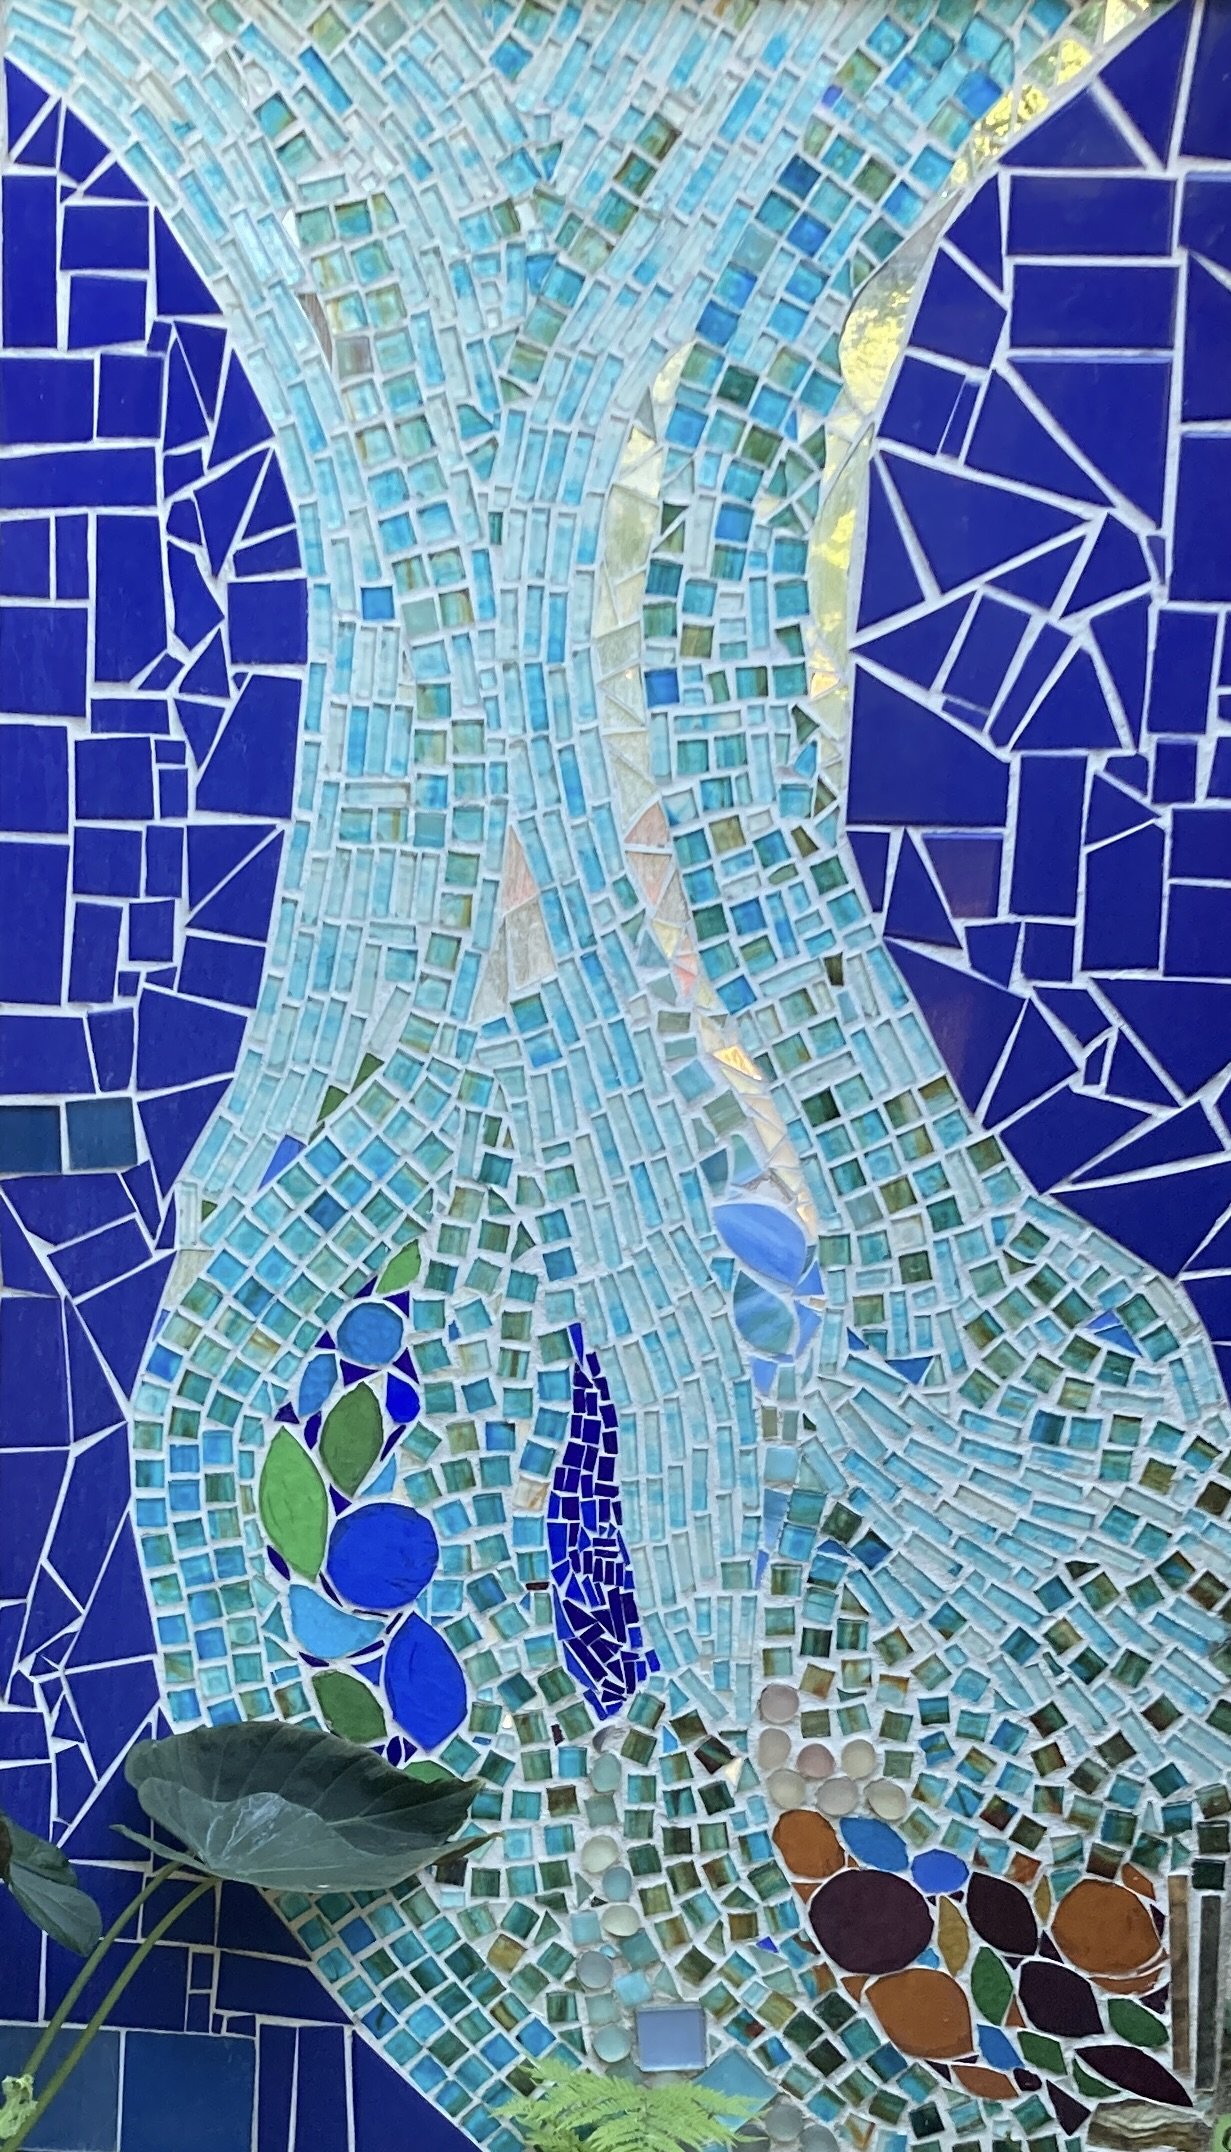  Outdoor Shower Mosaic 2017 Tile and glass 3x5’ 